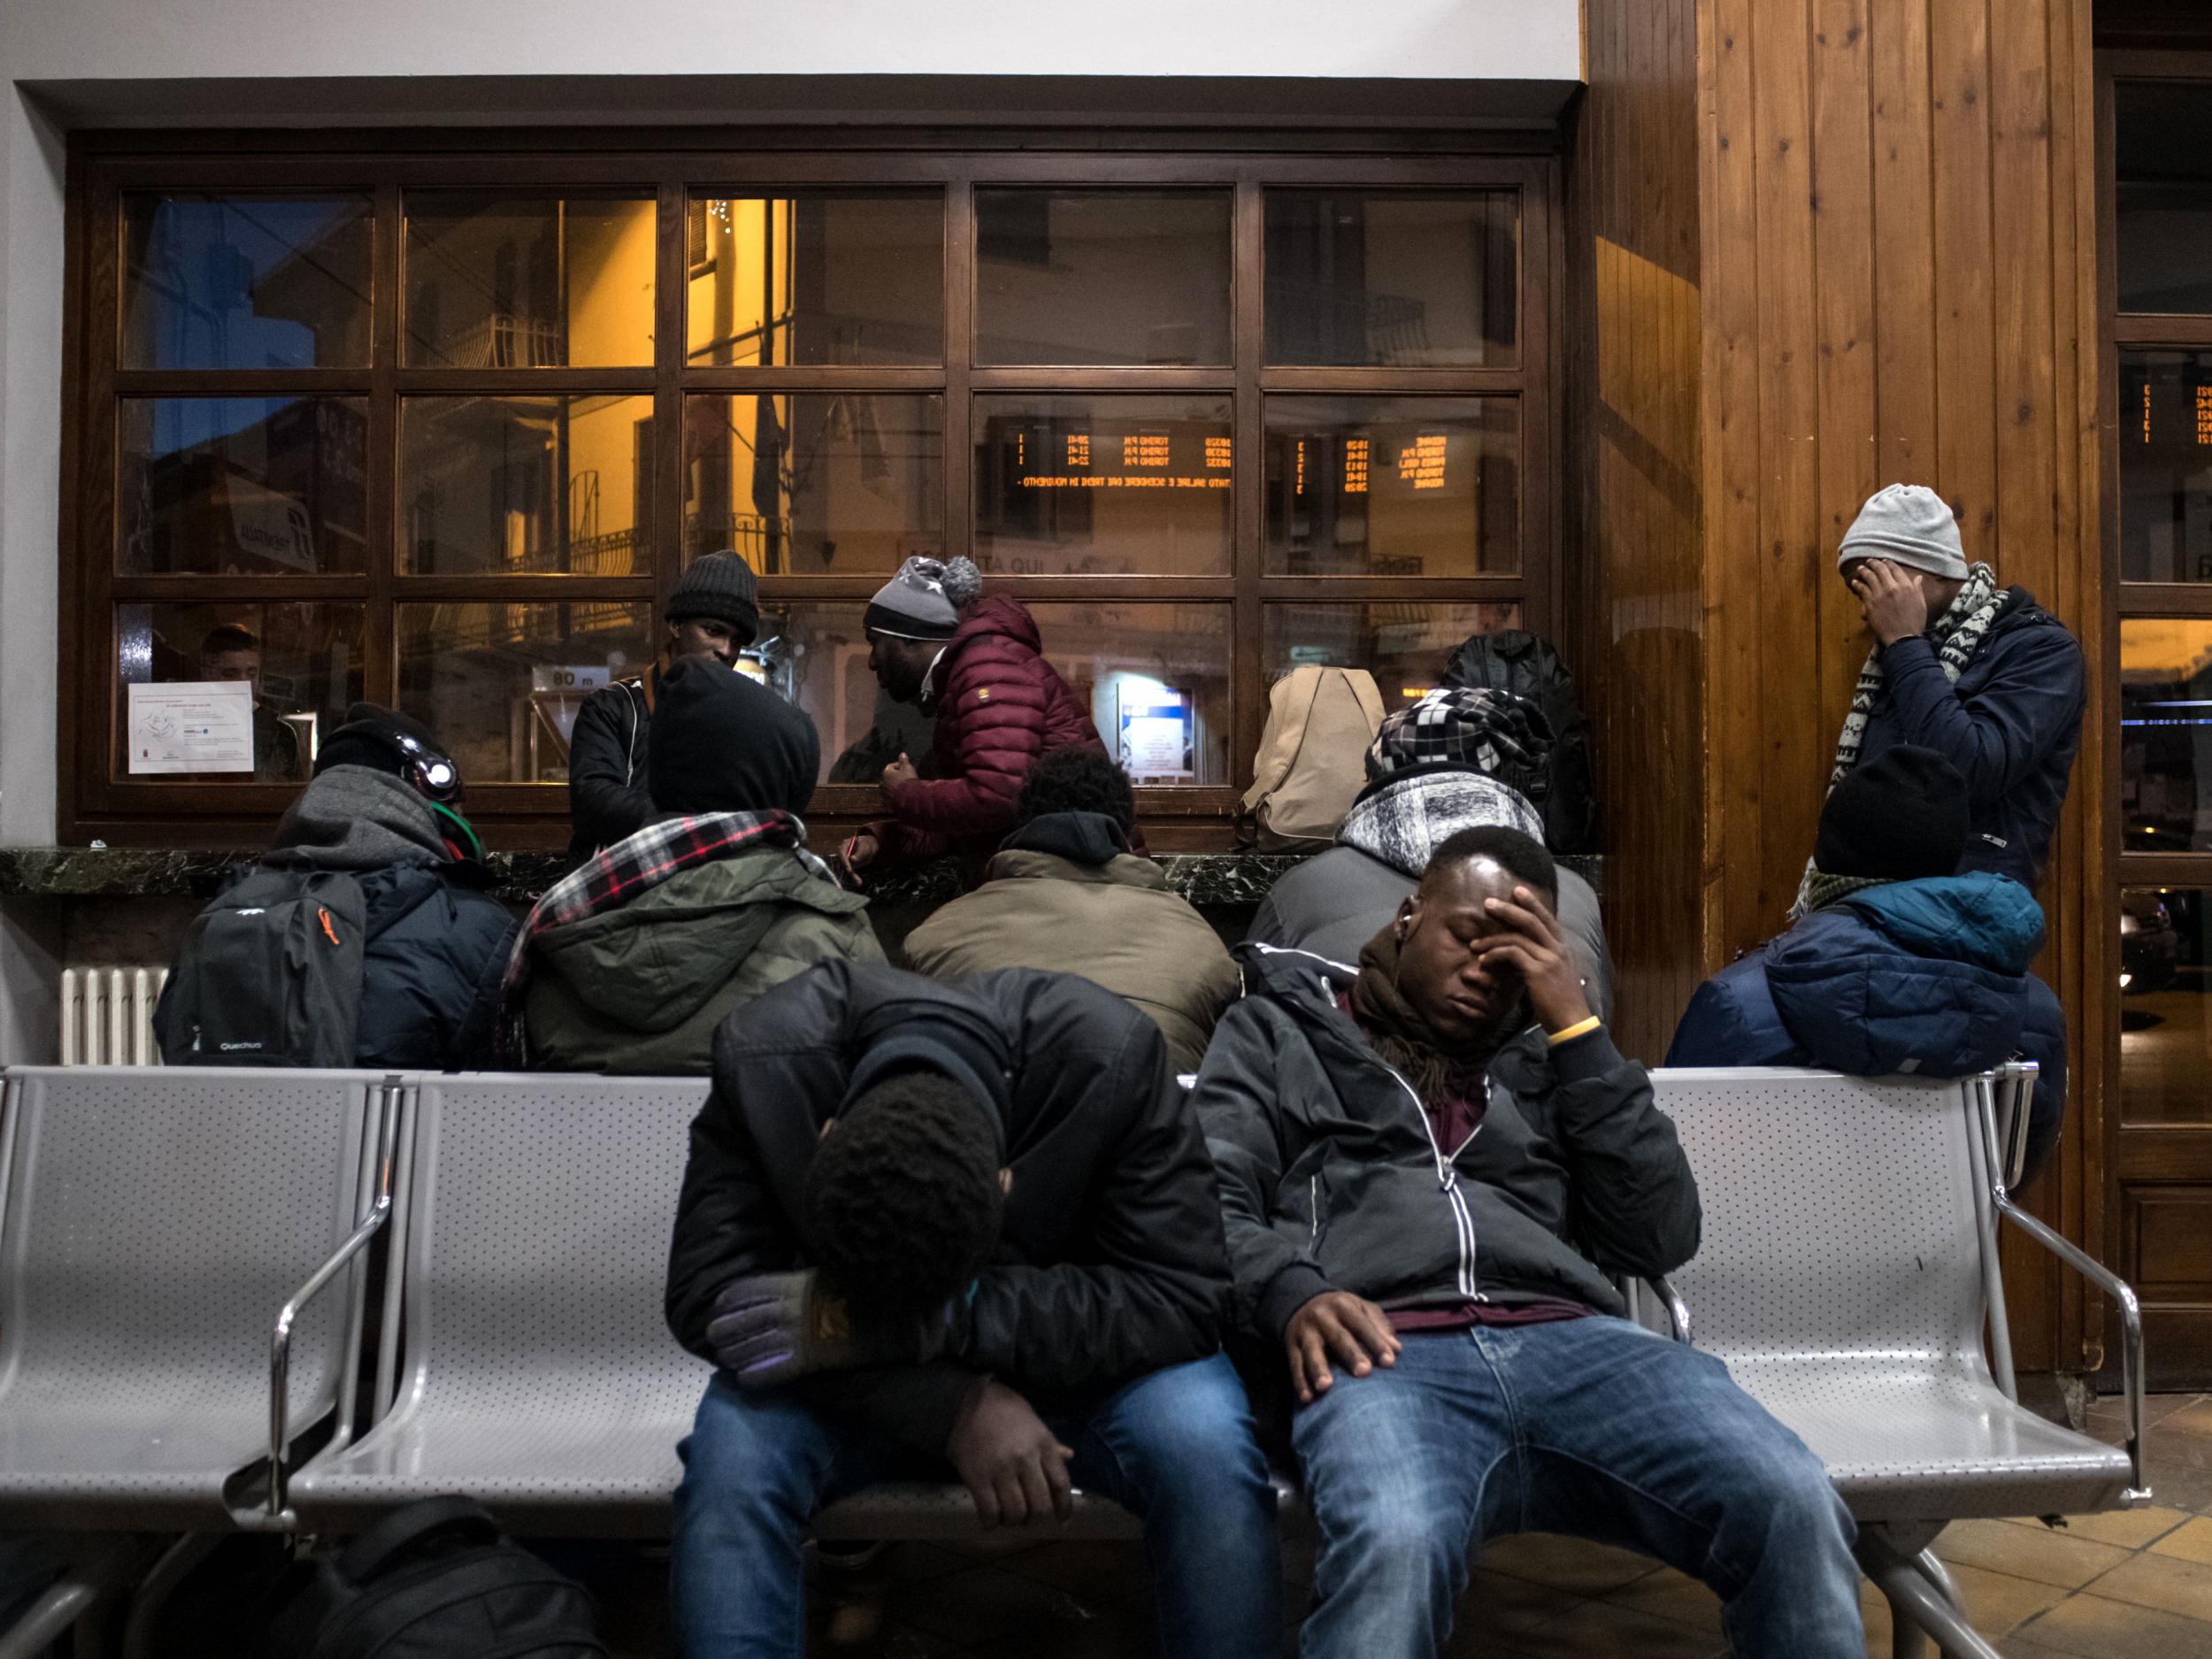 The town of Bardonecchia is used by people trying to enter France illegally